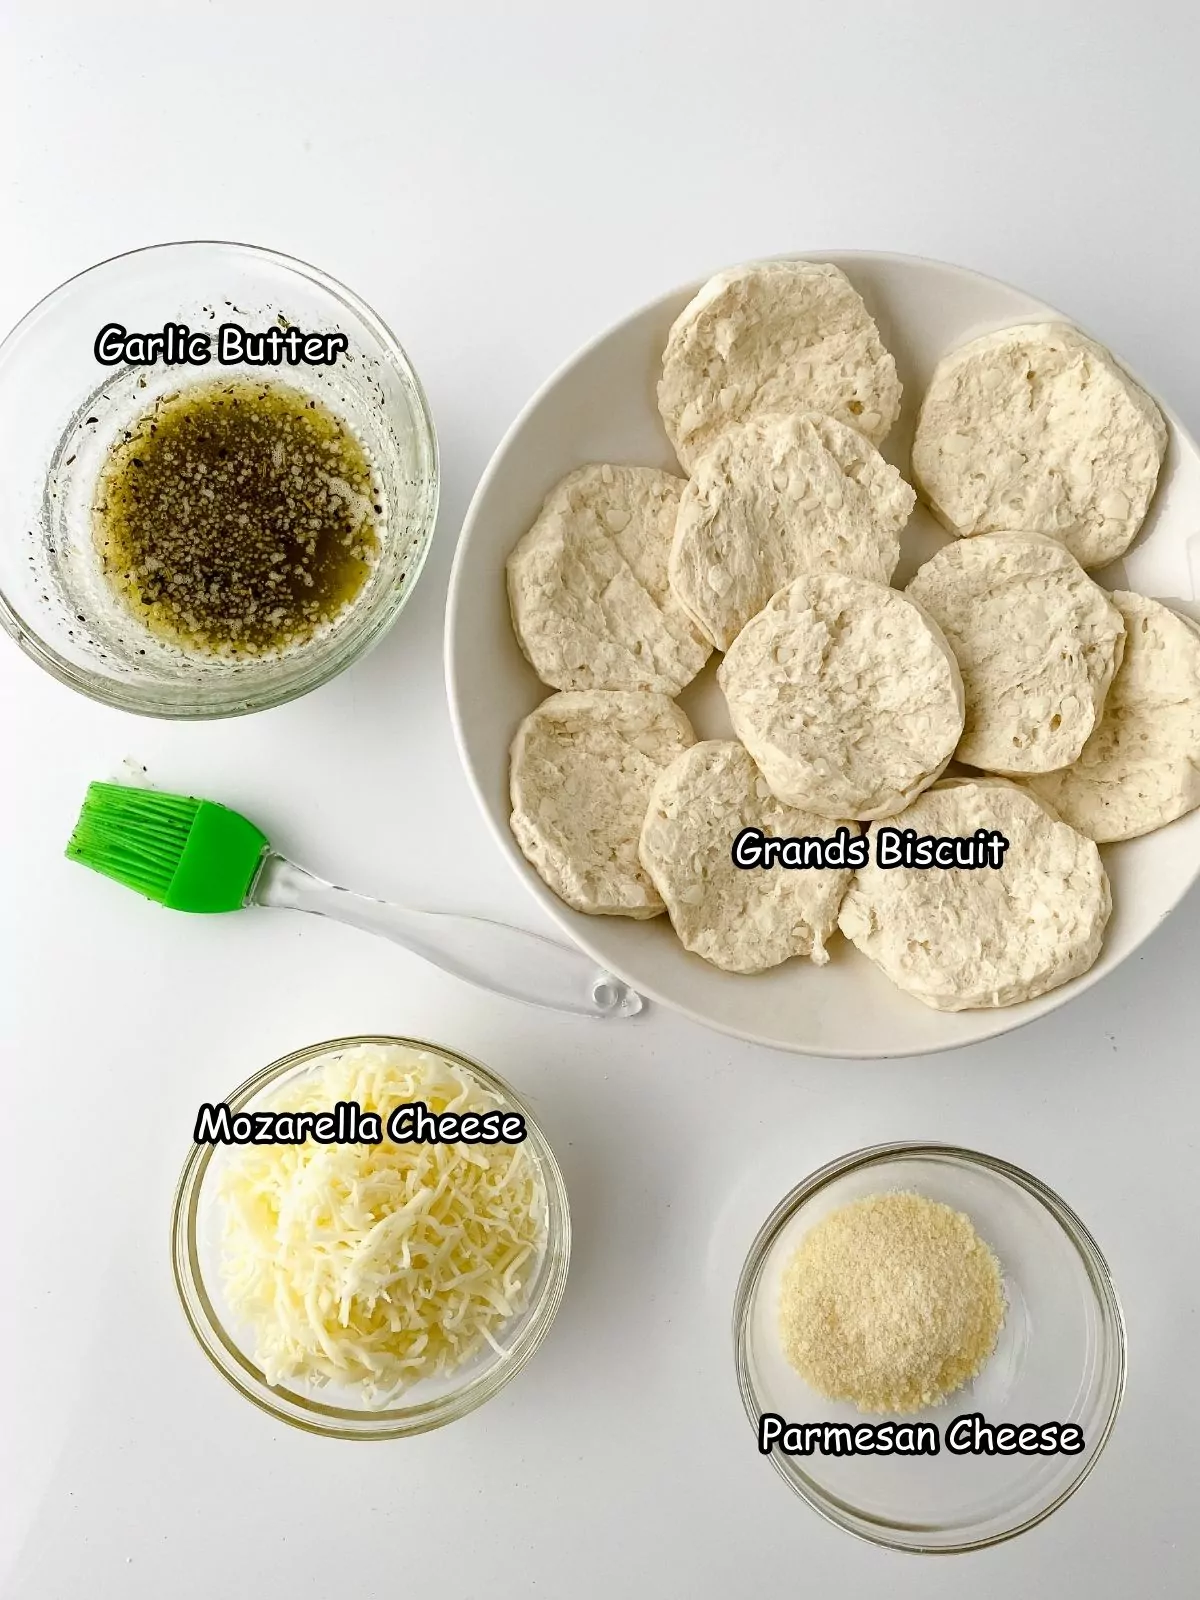 Ingredients for baked biscuits with mozzarella cheese.